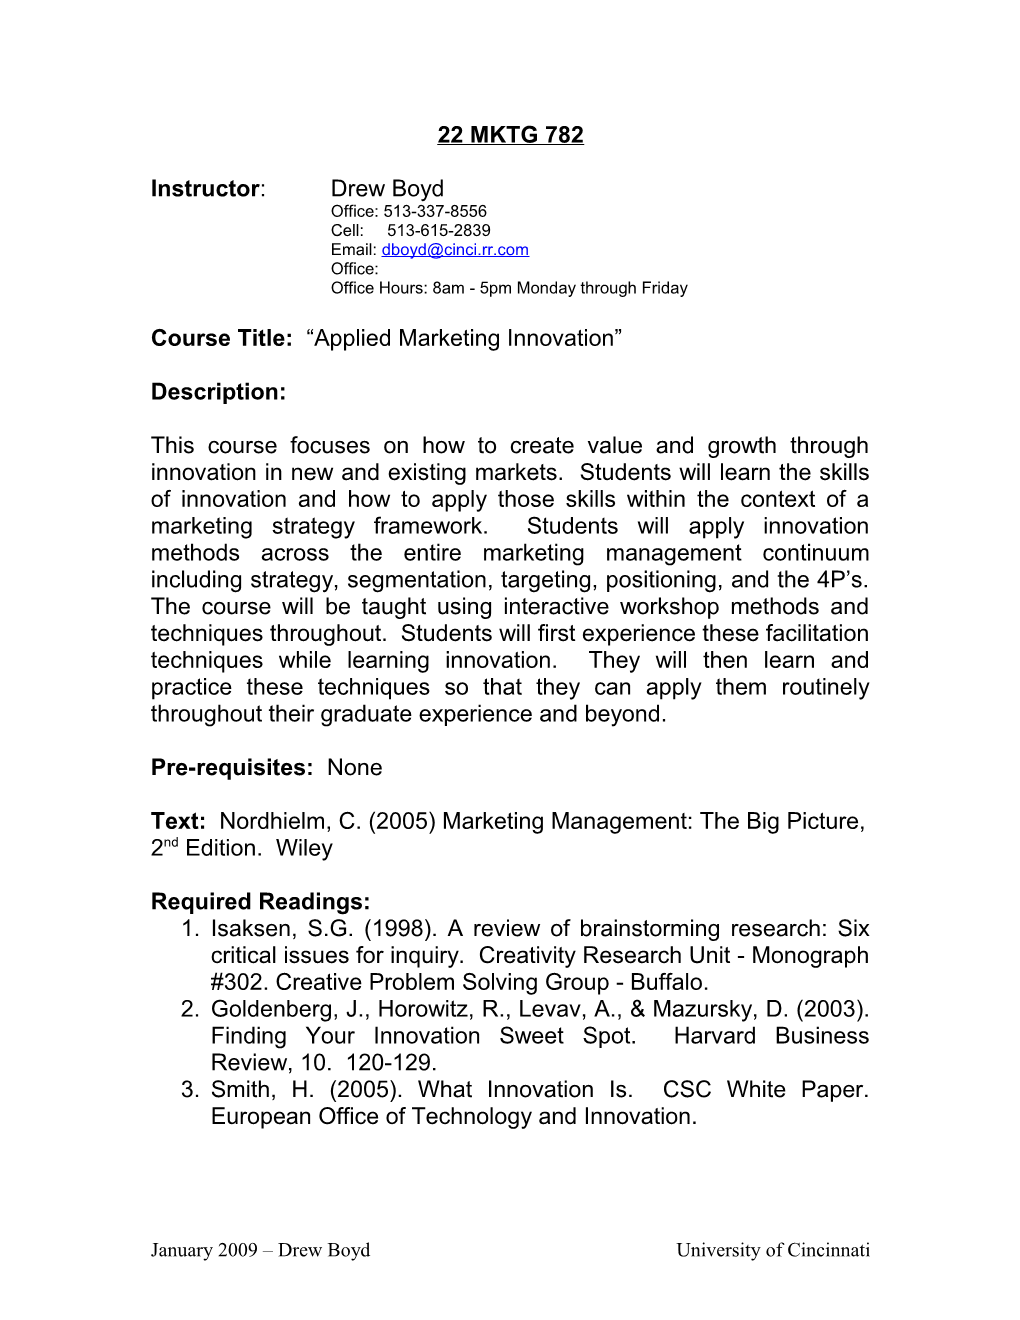 Course Title: Applied Marketing Innovation